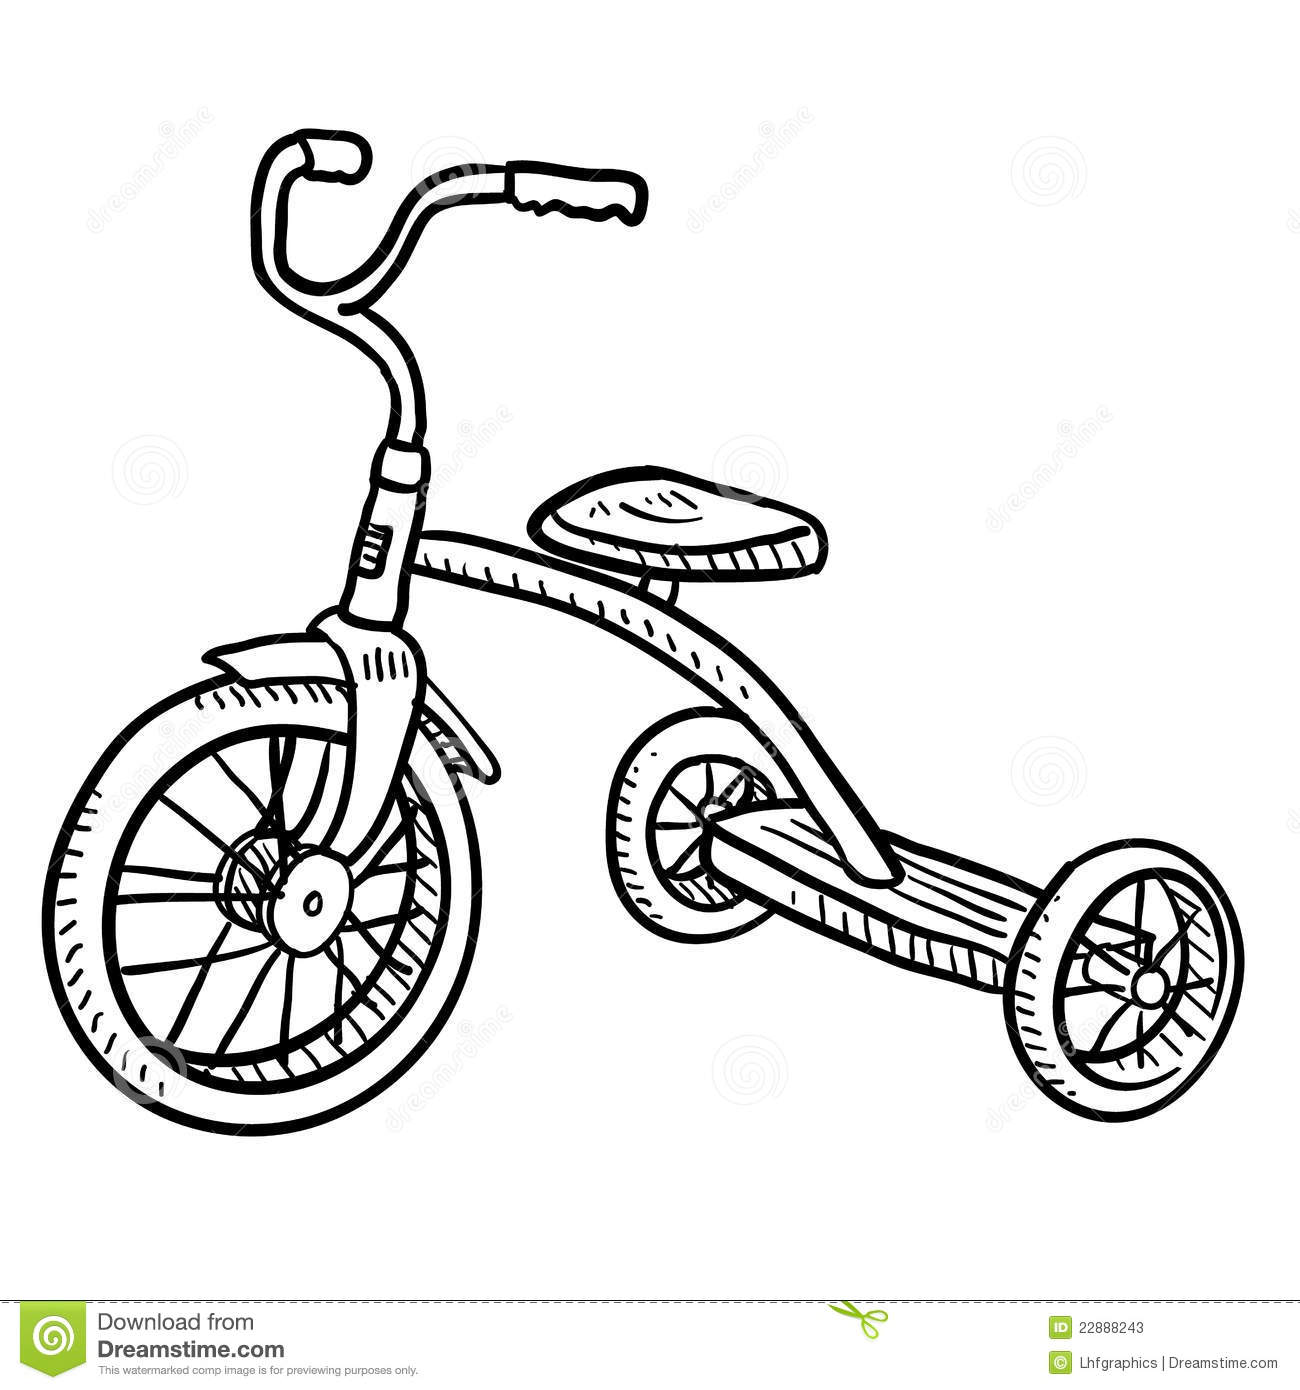 Child S Tricycle Sketch Stock Photos   Image  22888243